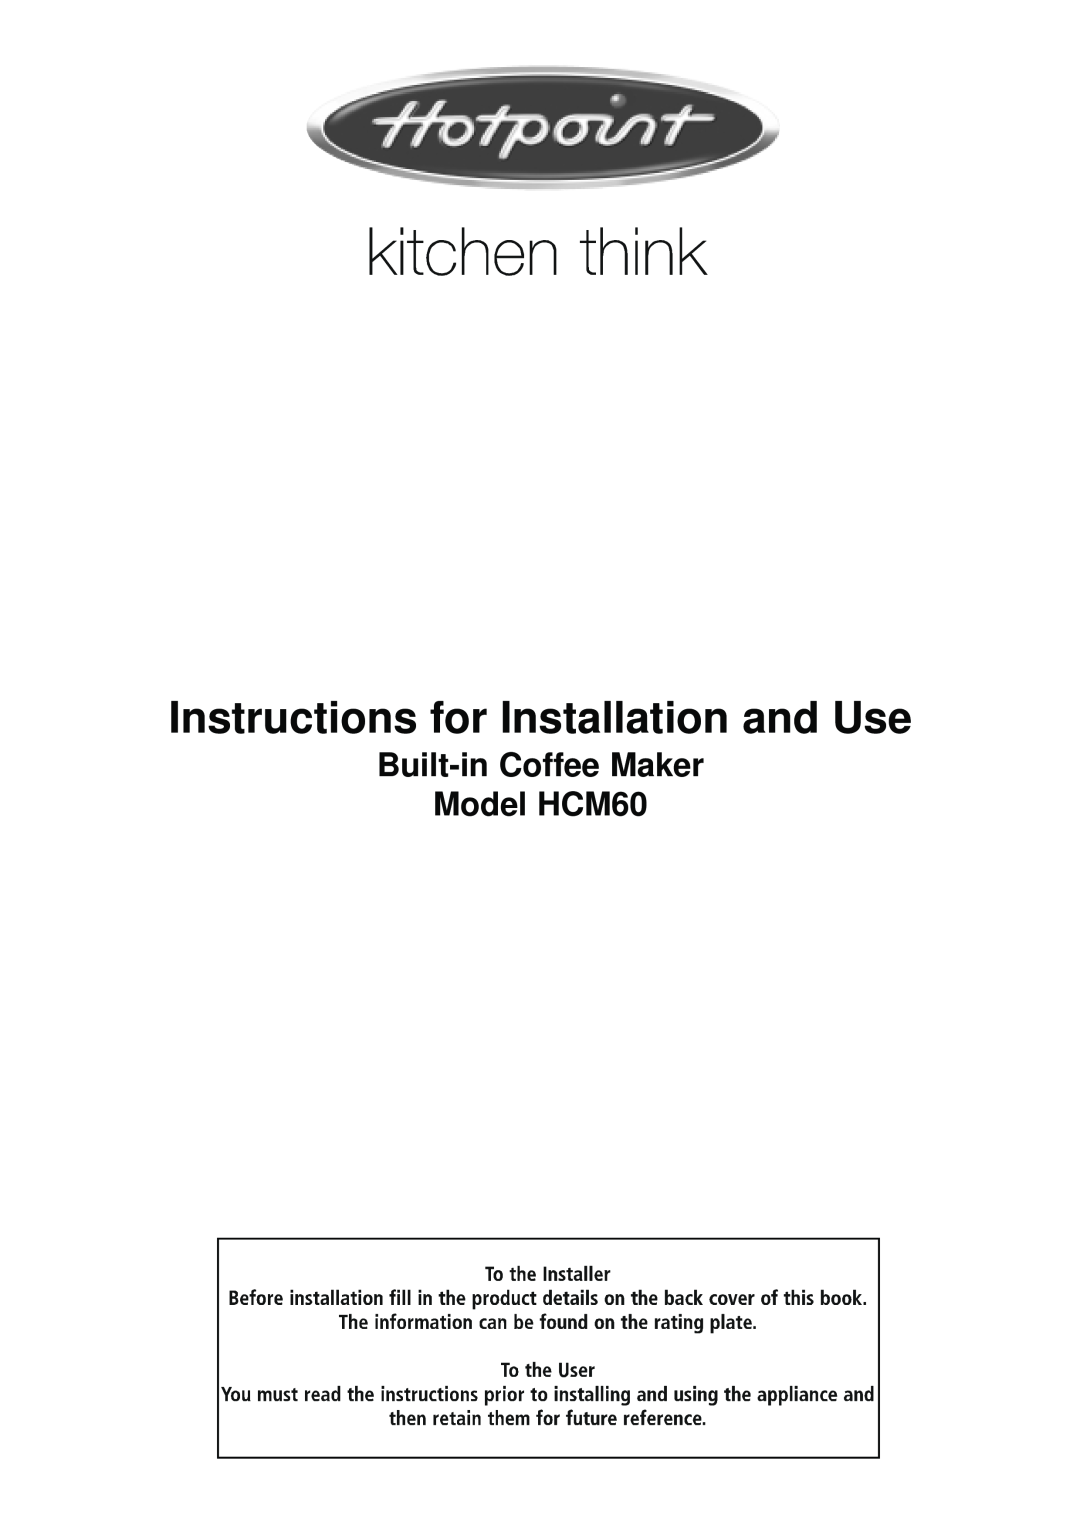 Hotpoint manual Built-inCoffee Maker Model HCM60, Instructions for Installation and Use 